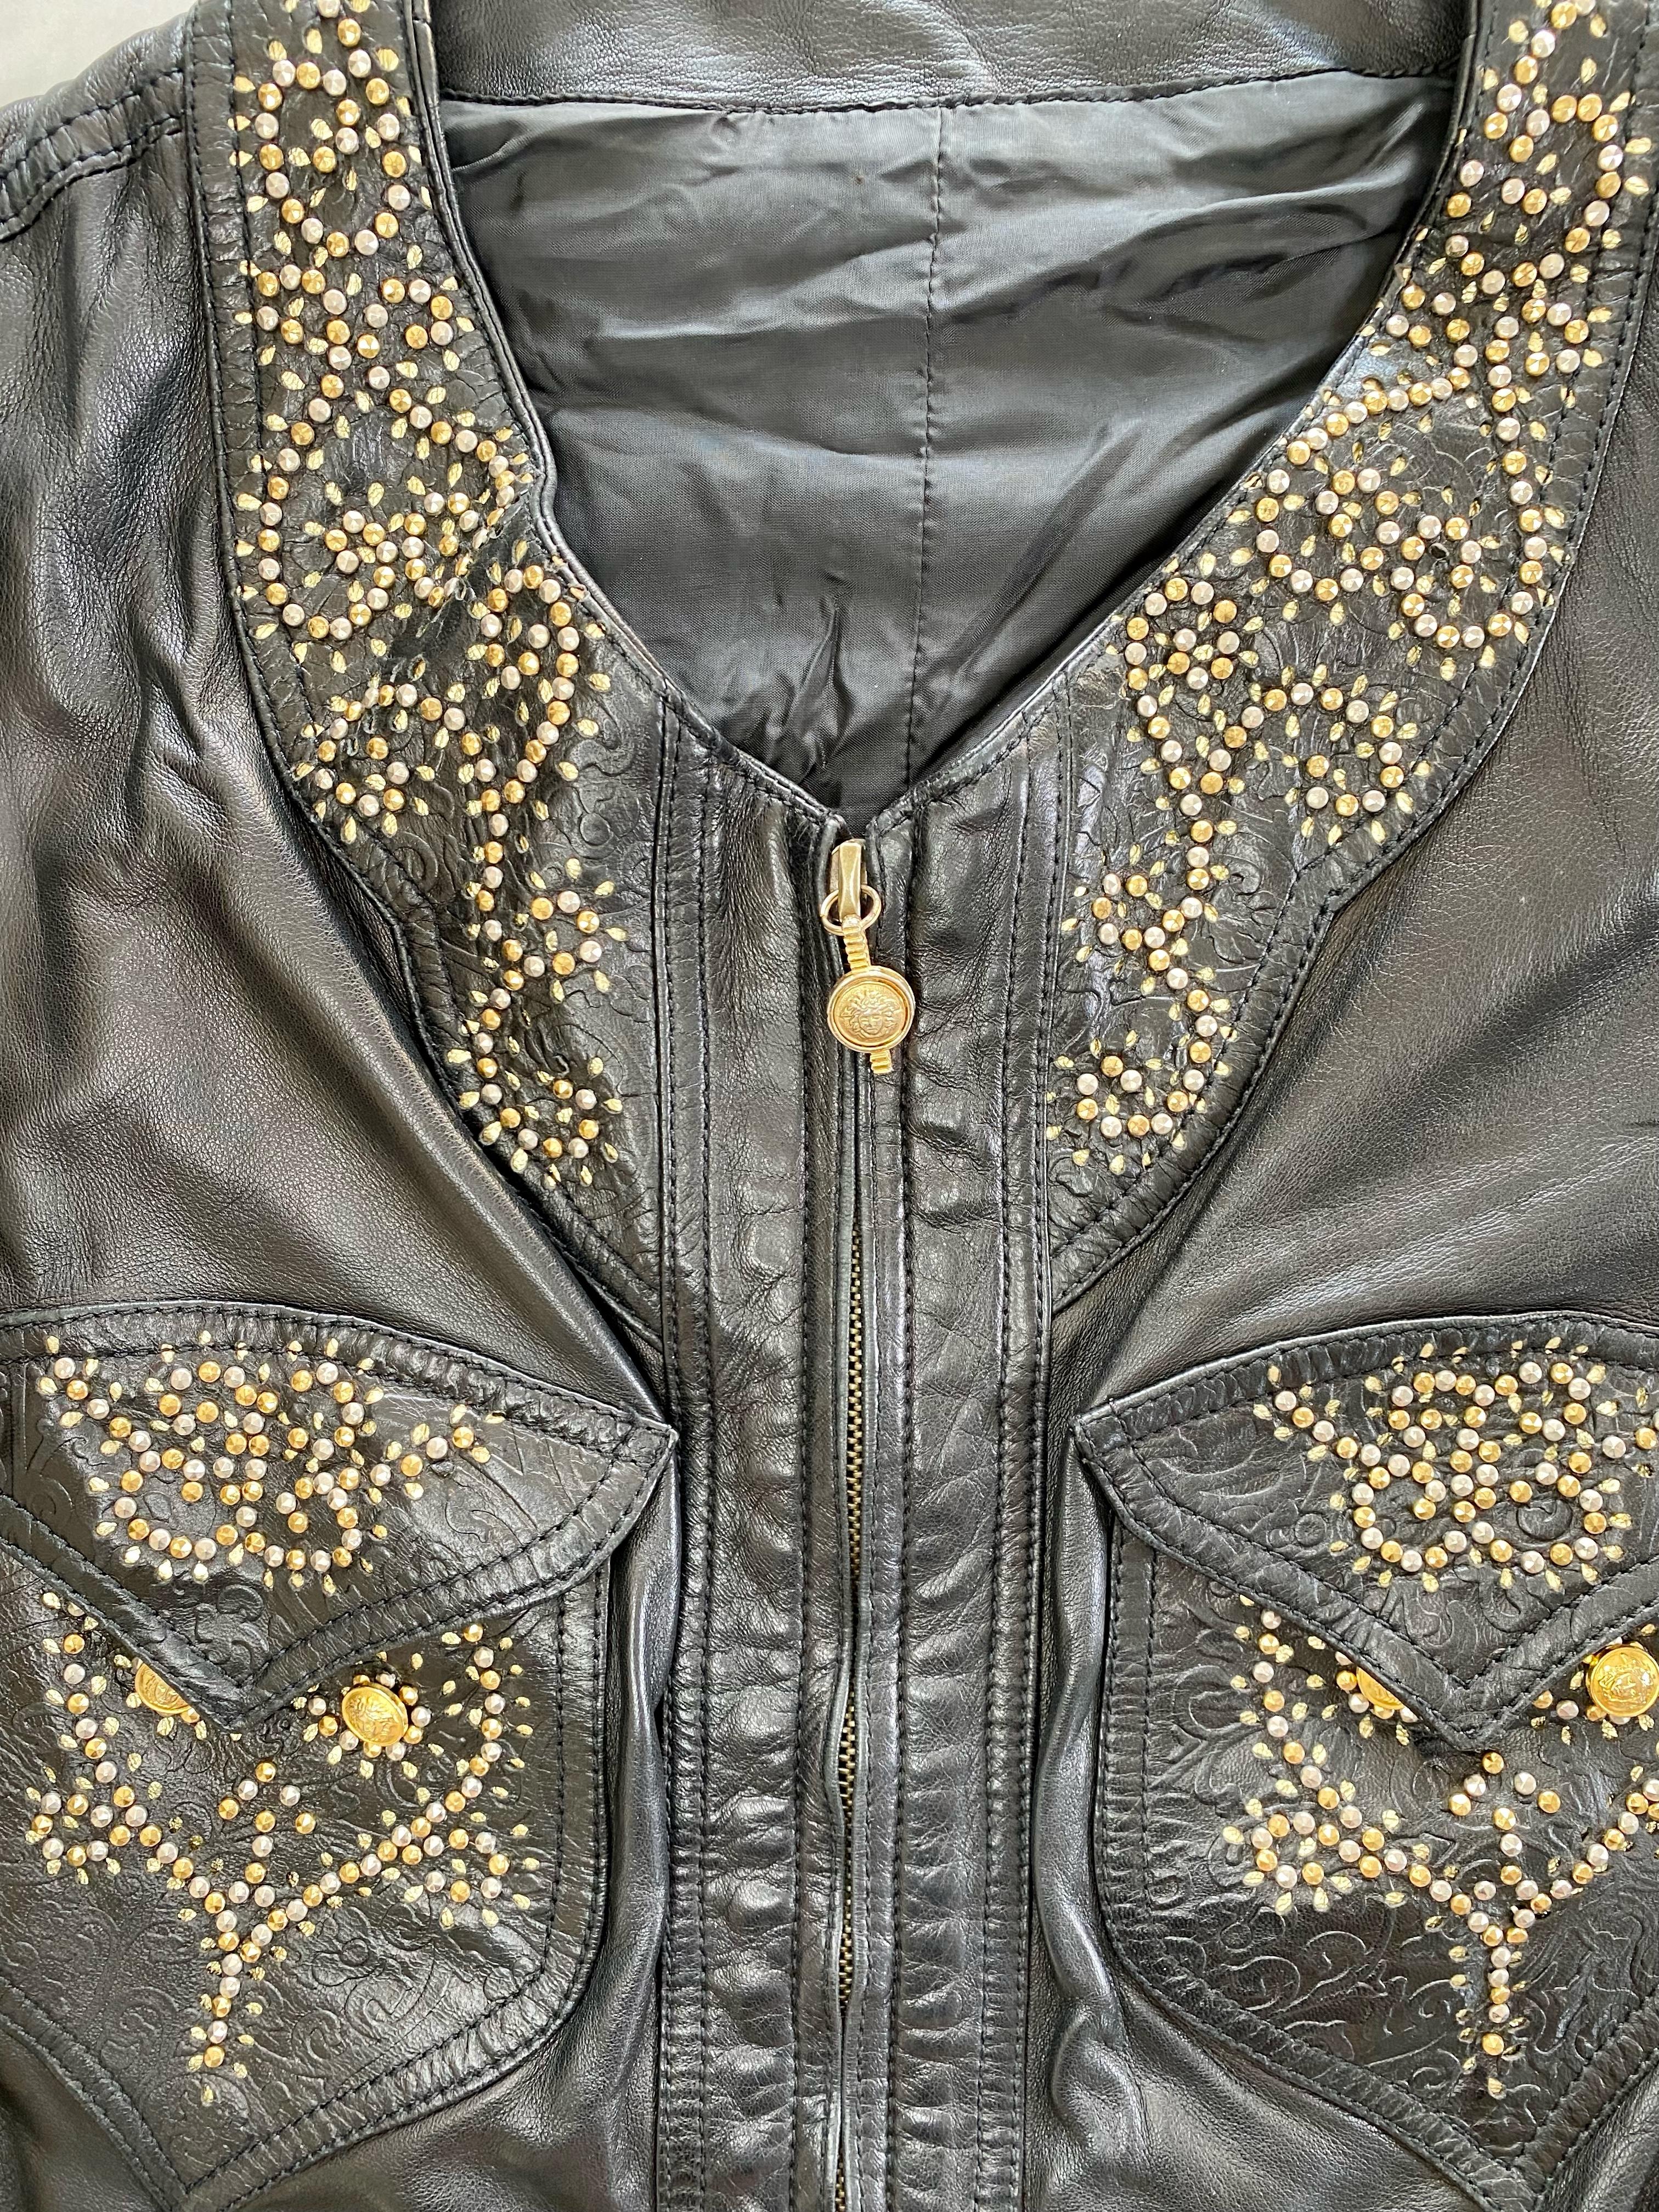 F/W 1992 Gianni Versace 'Miss S&M' Studded Leather Vest Medusa Accents In Good Condition For Sale In West Hollywood, CA